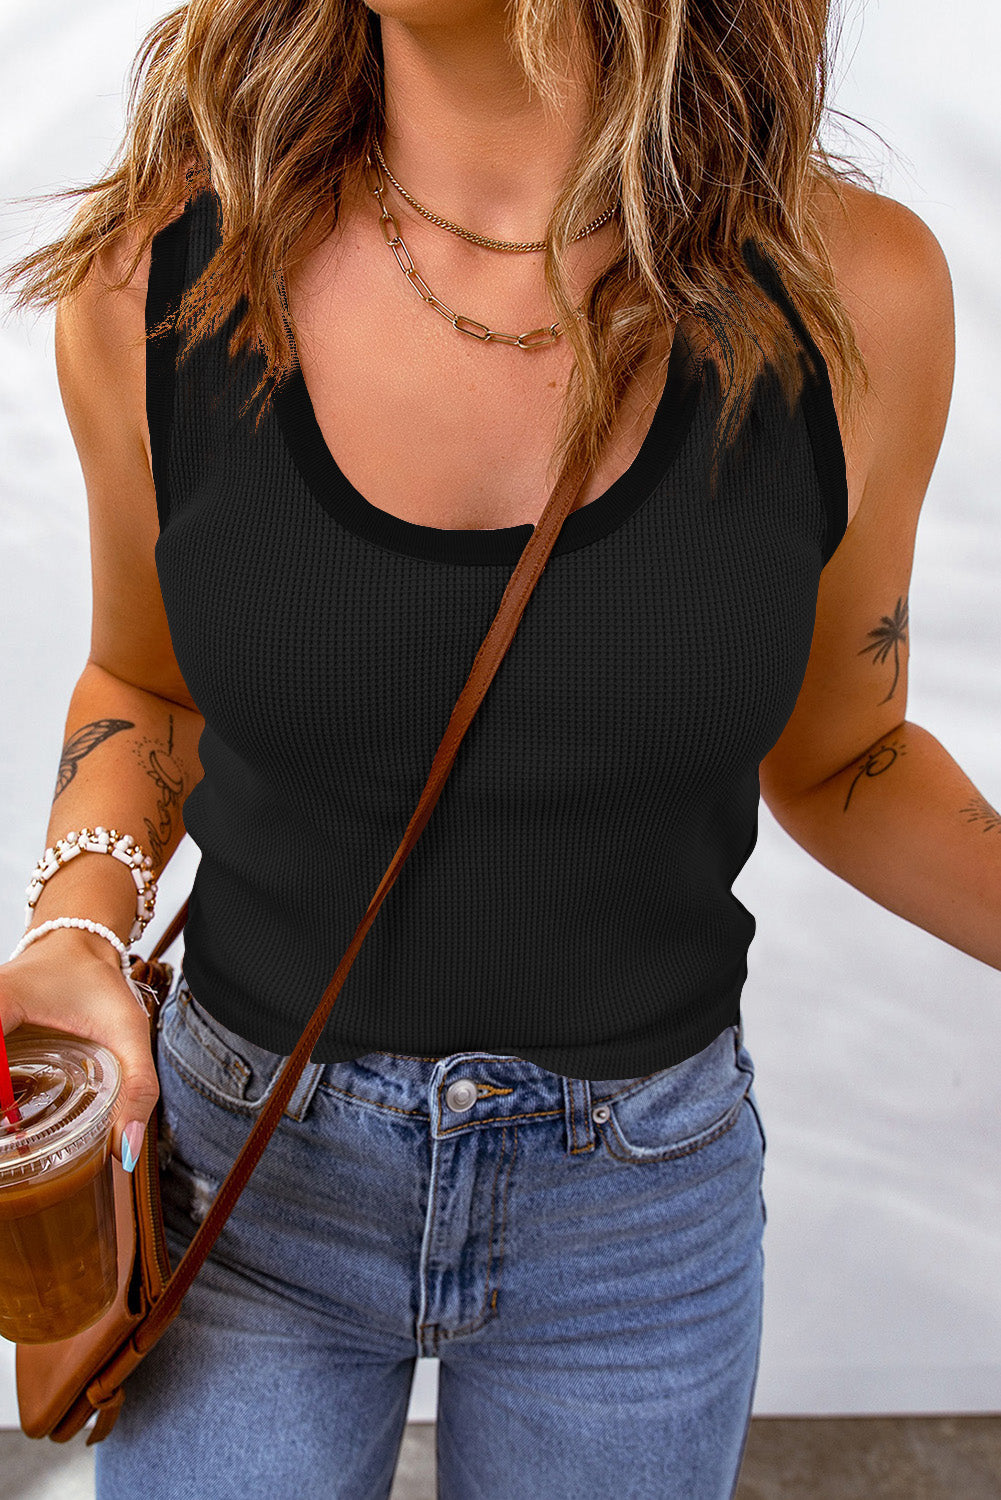 Waffle-Knit Scoop Neck Tank Top